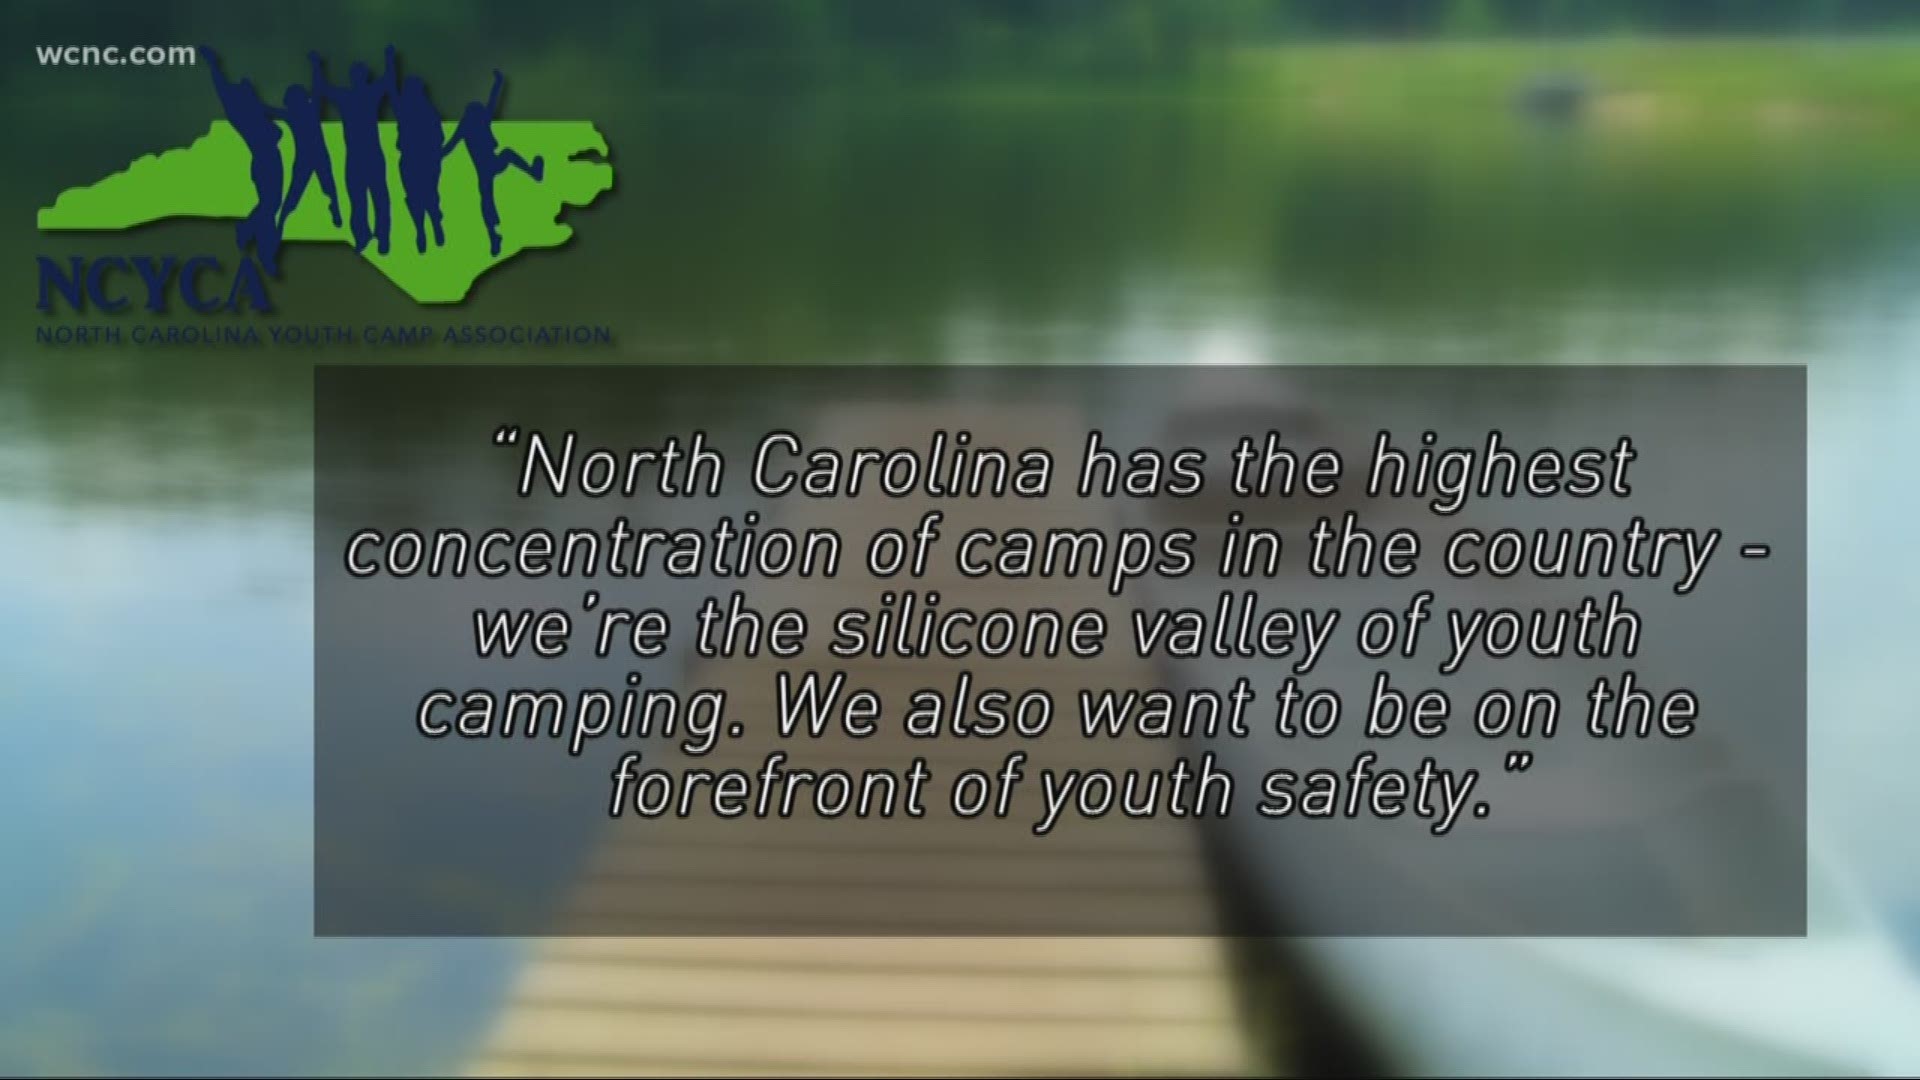 There are currently 905 registered sex offenders in Mecklenburg County. NBC Charlotte found several living within a half mile of kids summer programs.